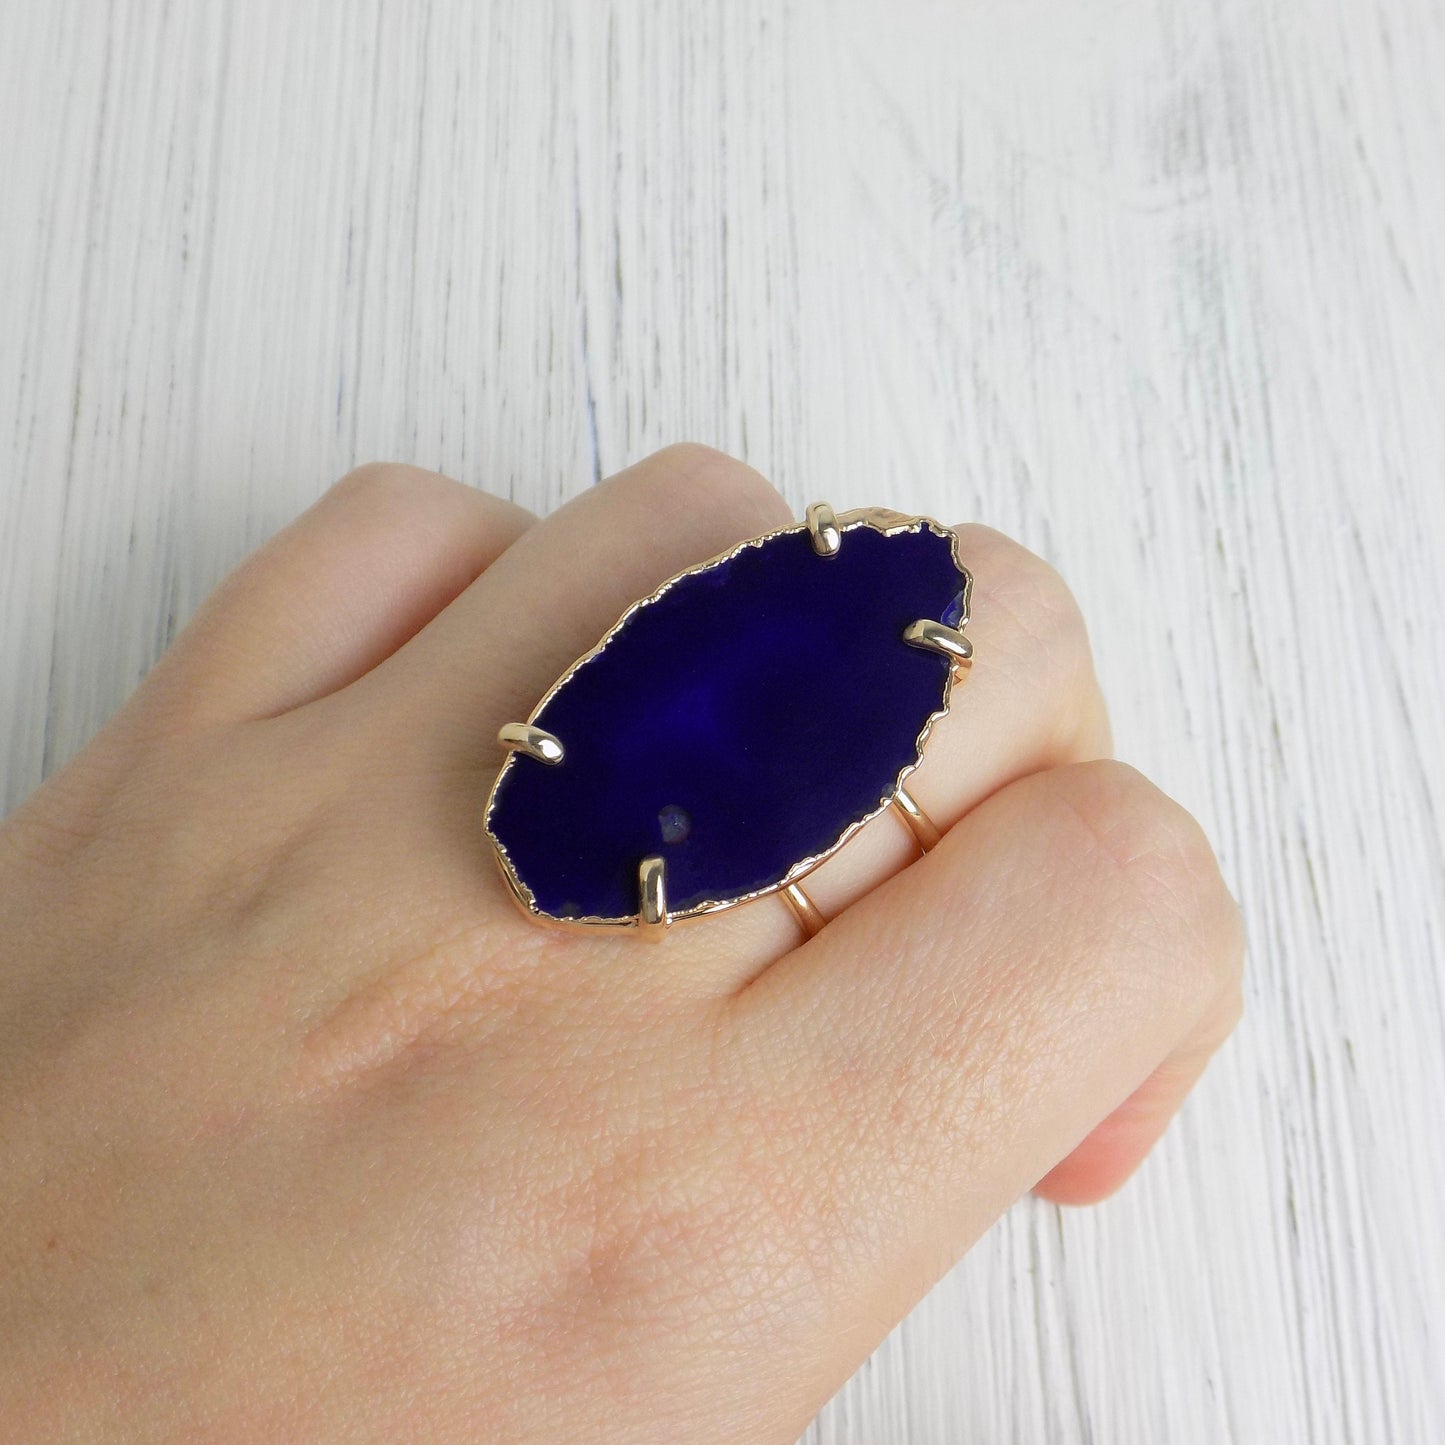 Purple Statement Gemstone Ring Gold Adjustable, Agate Slice Rings, Gift For Mom, G14-150